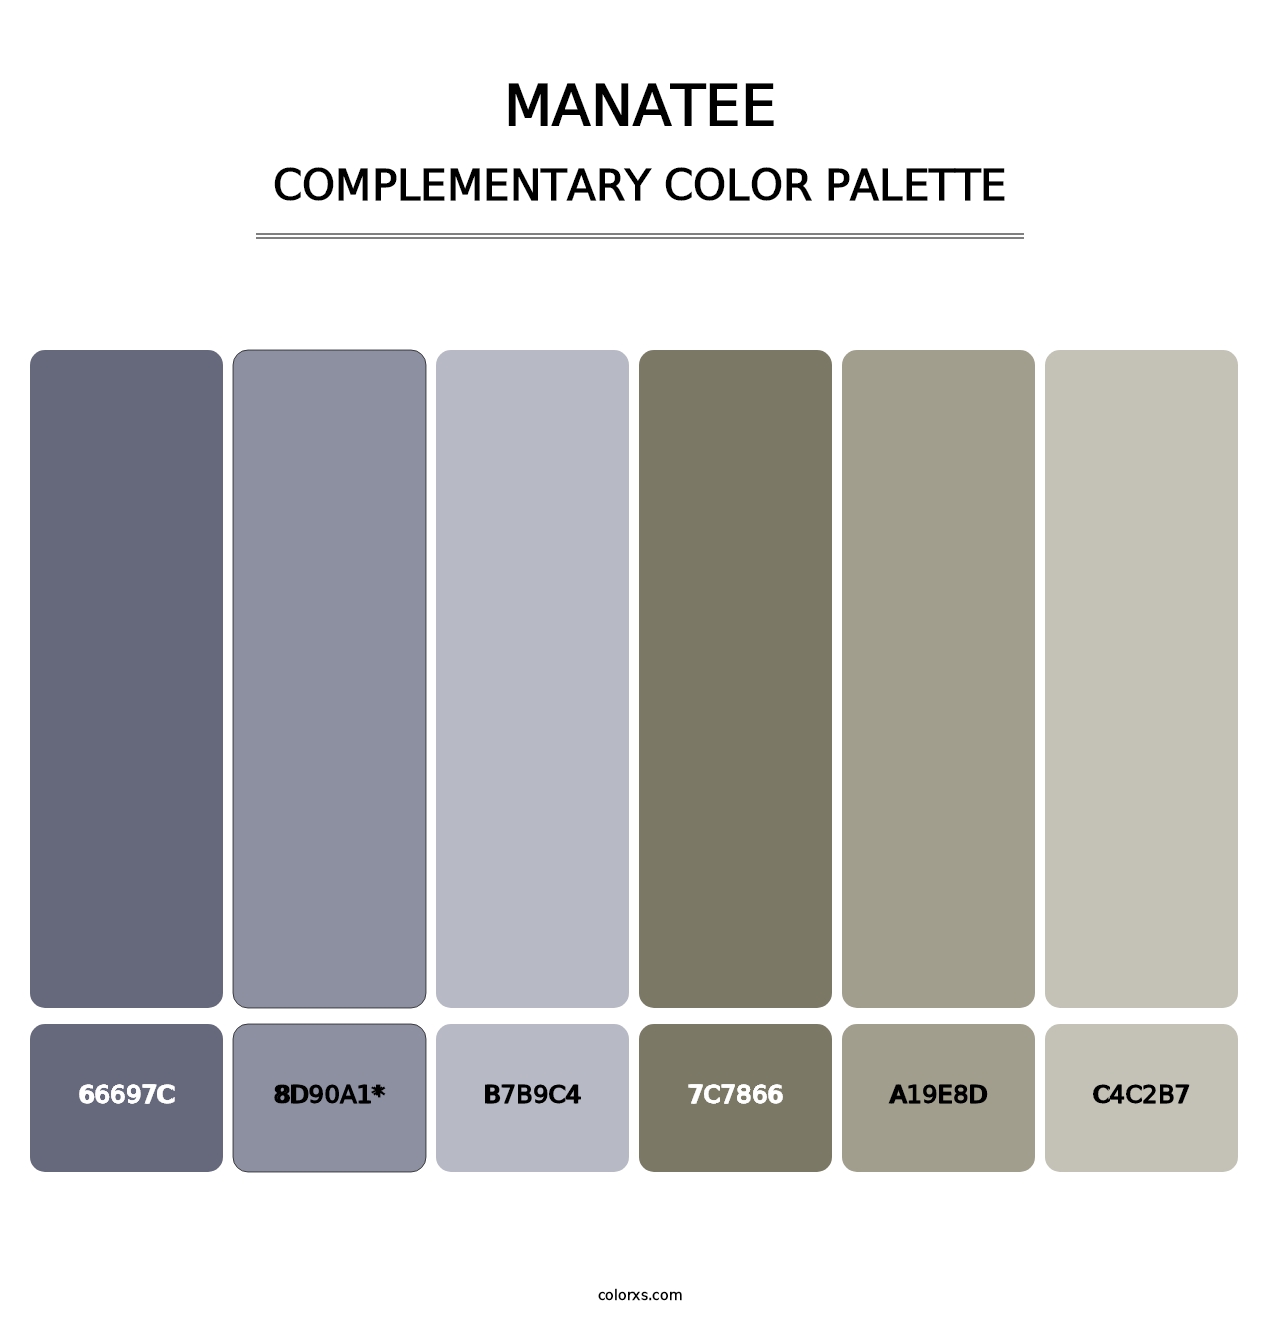 Manatee - Complementary Color Palette